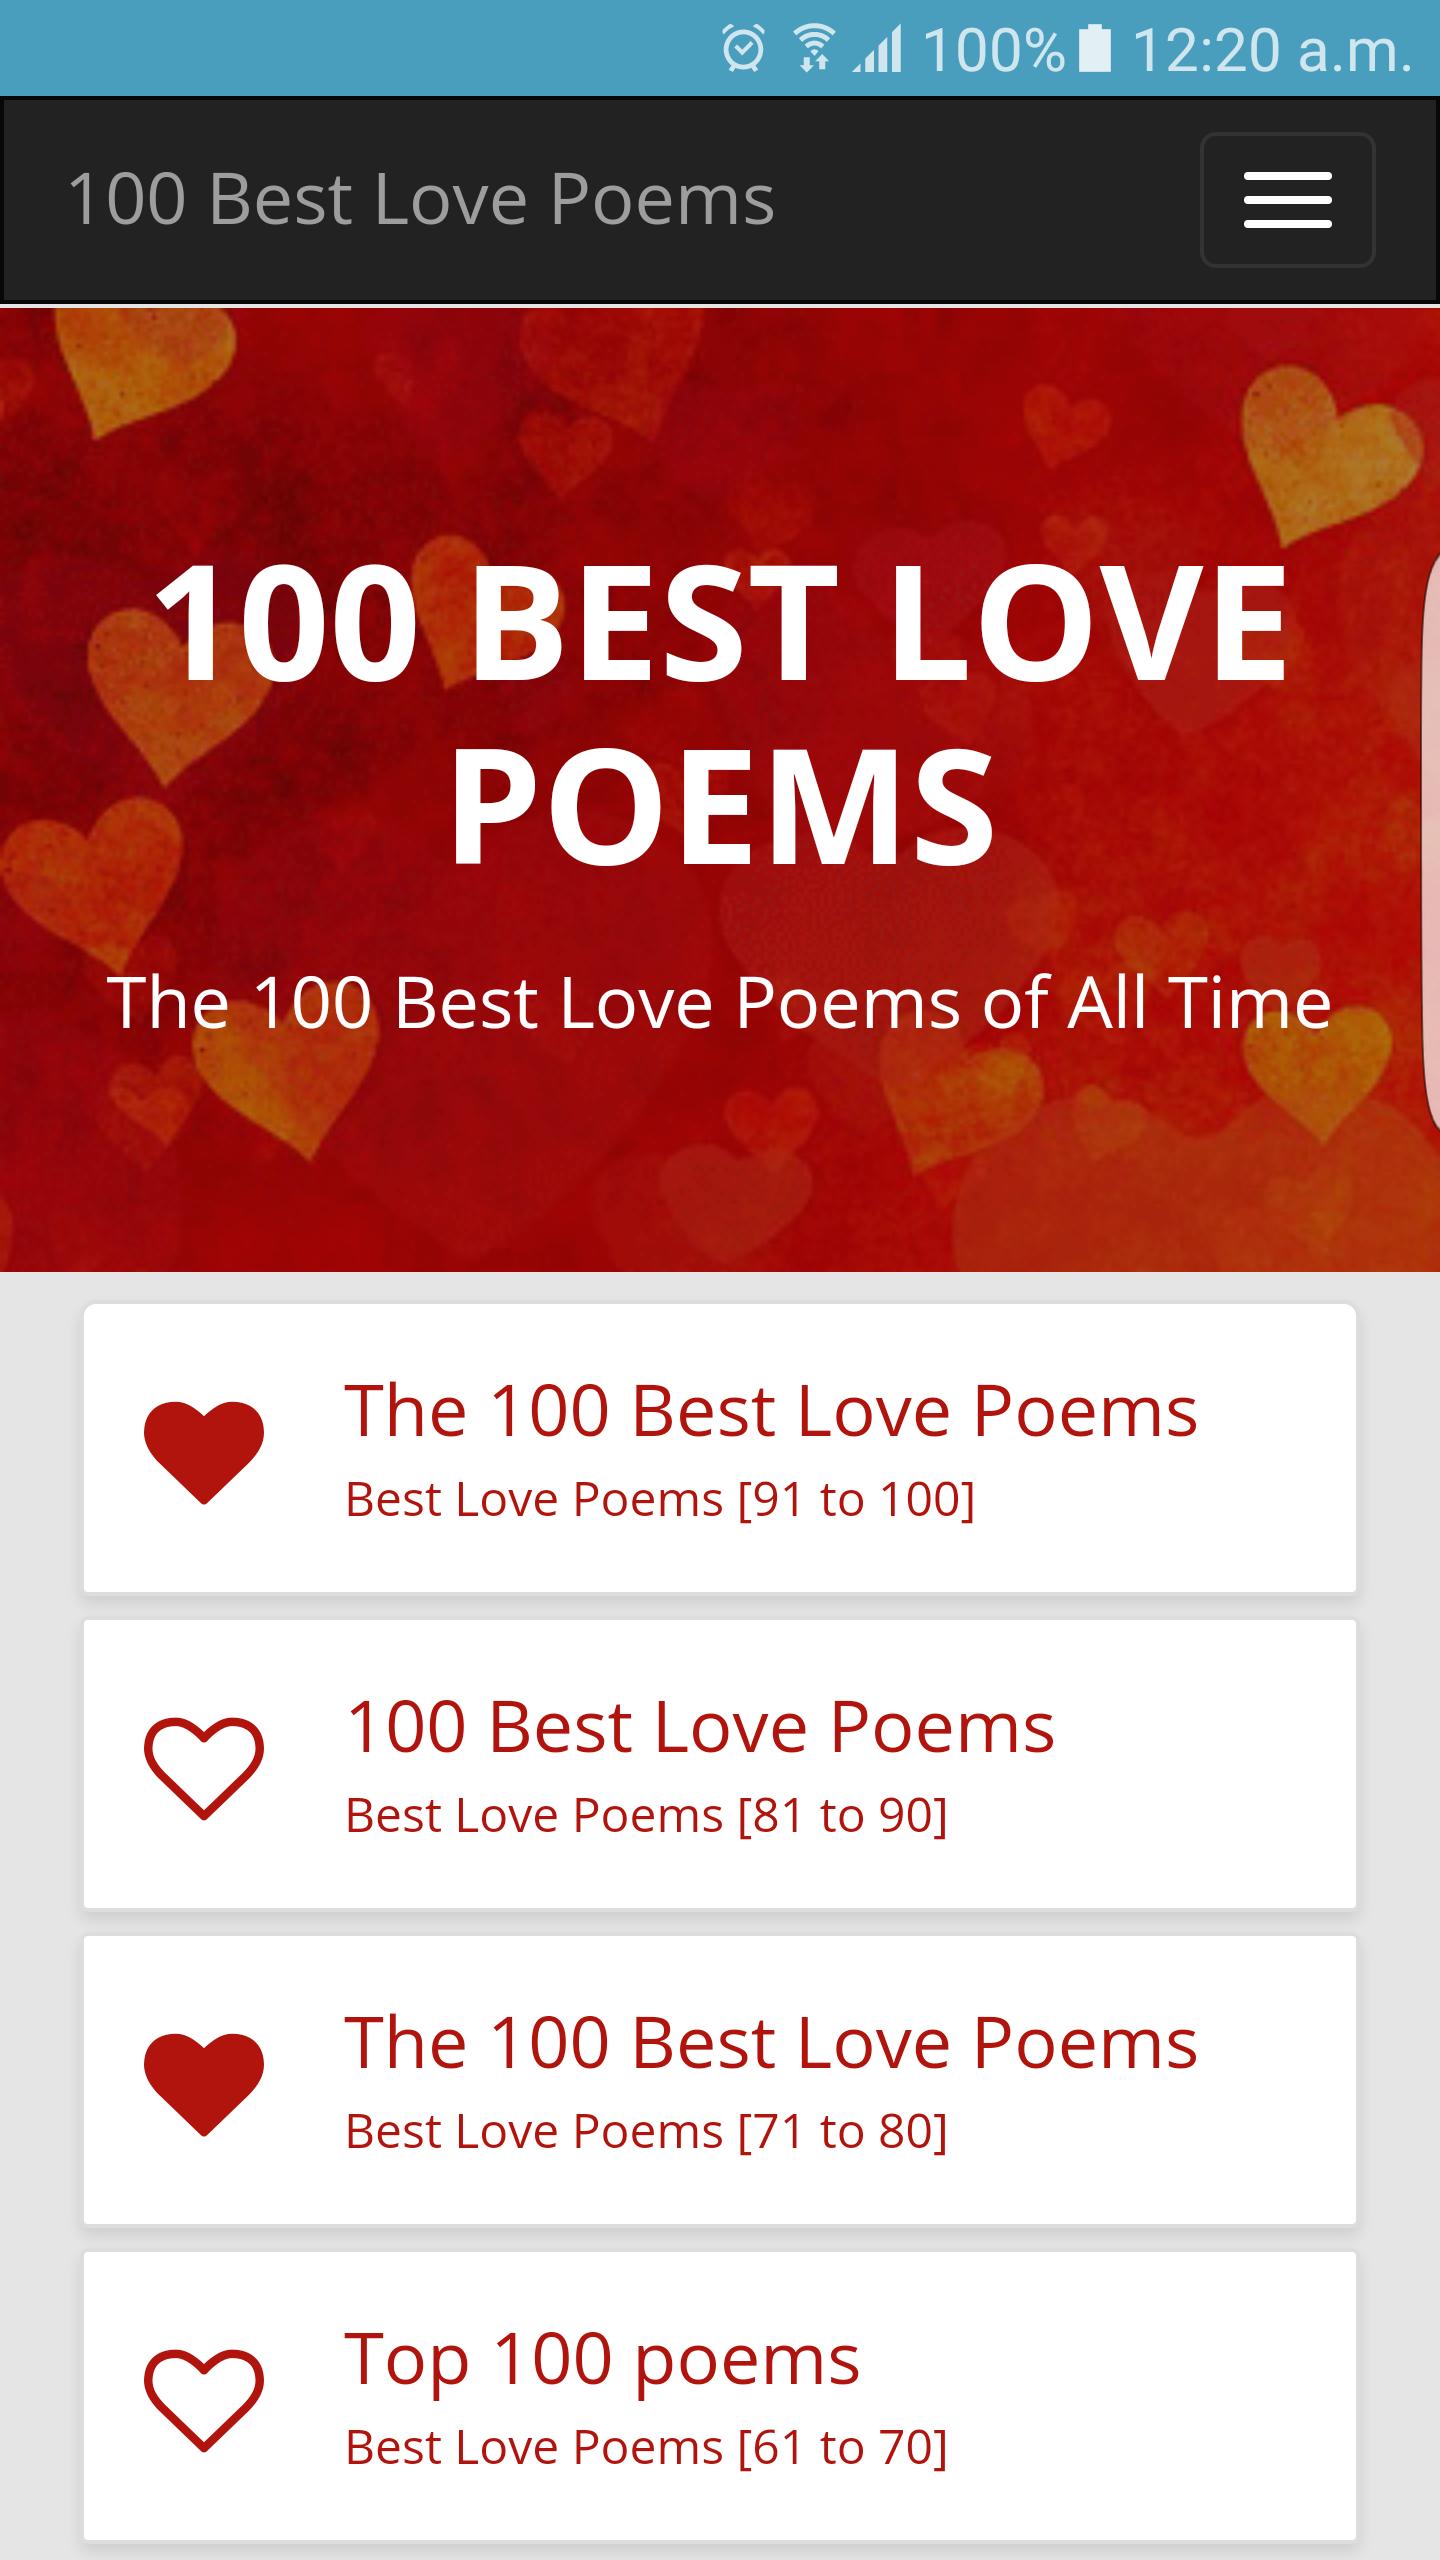 Short Love Poems for Android - APK Download